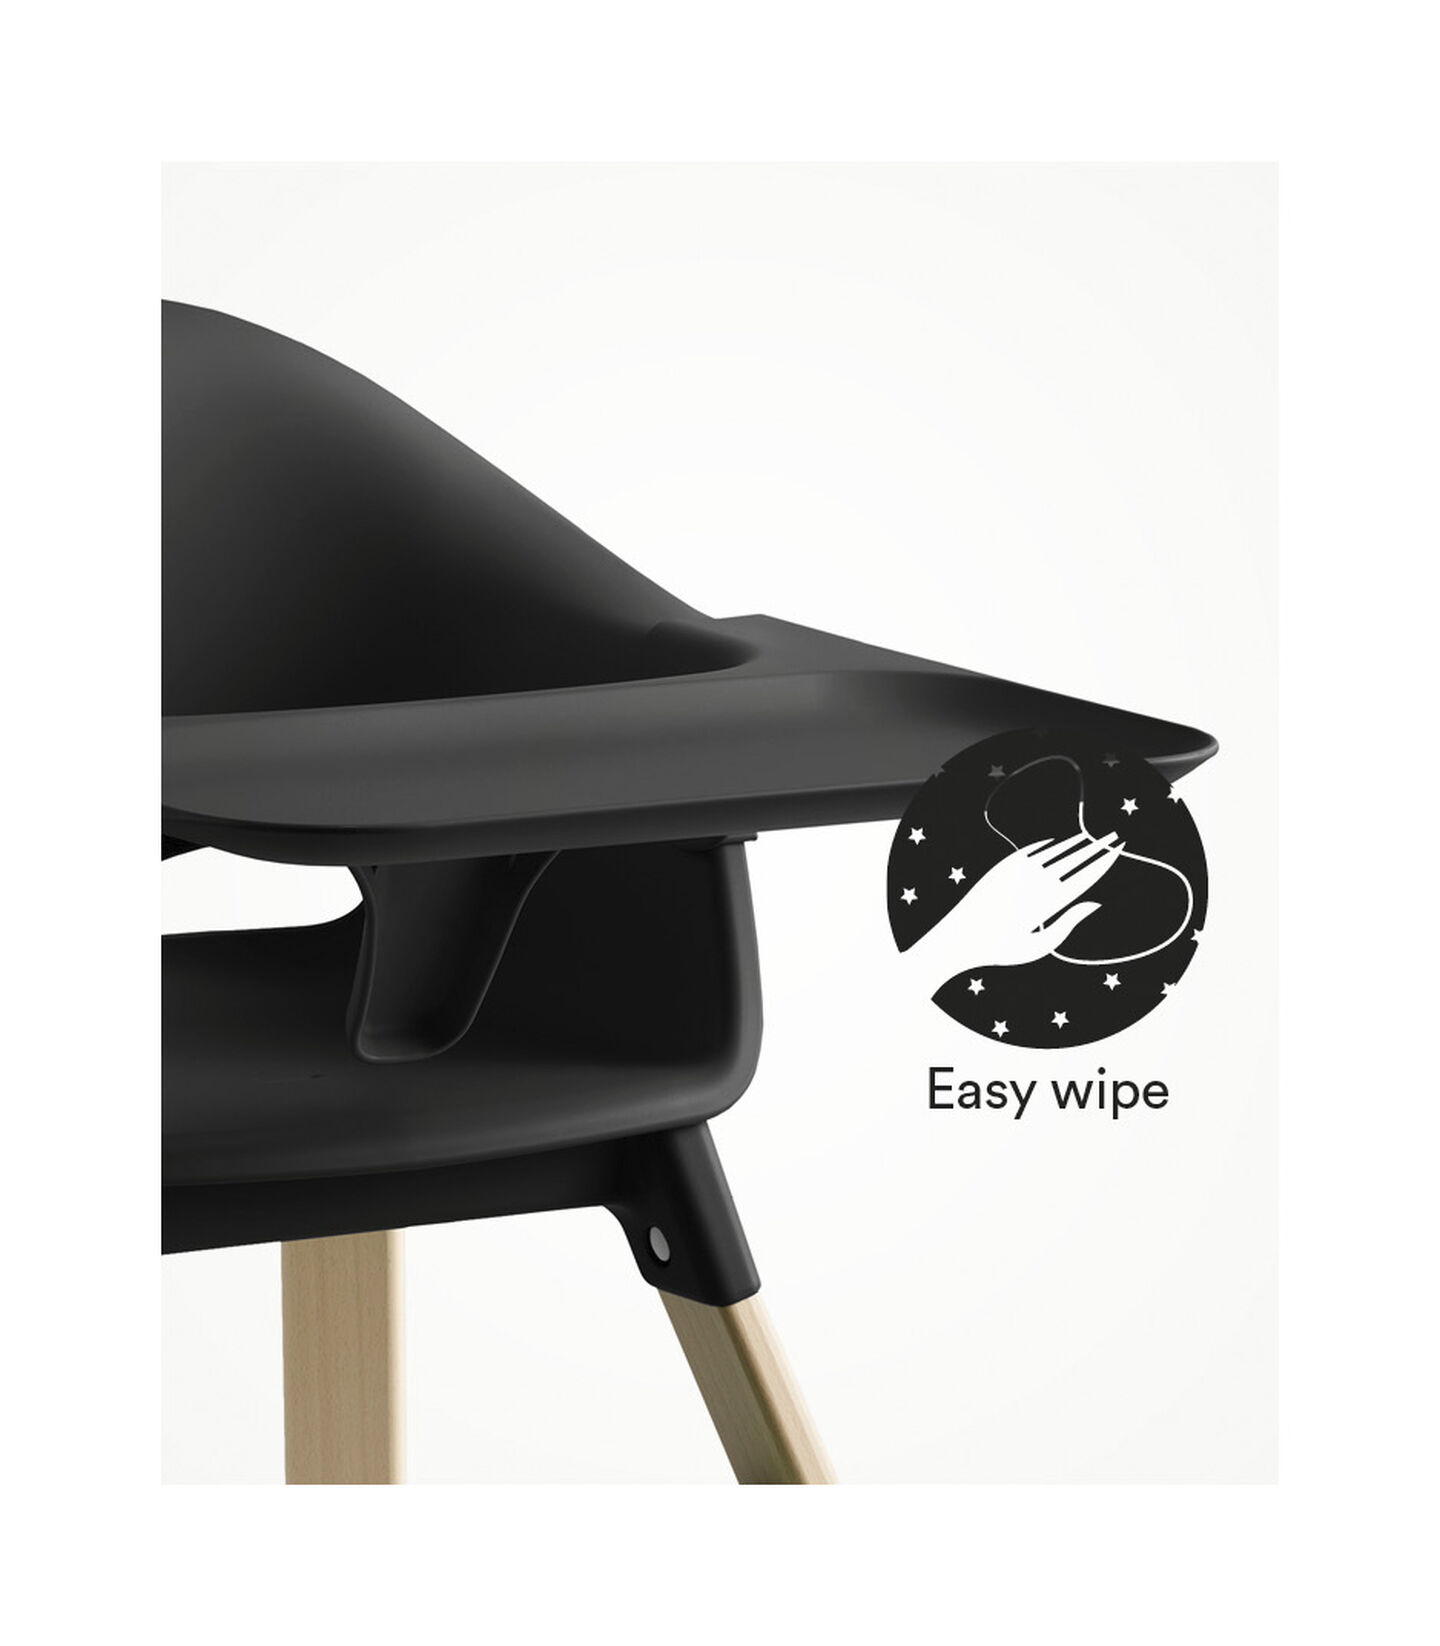 Stokke® Clikk™ High Chair with Tray, in Natural and Black. Easy Wipe. view 7